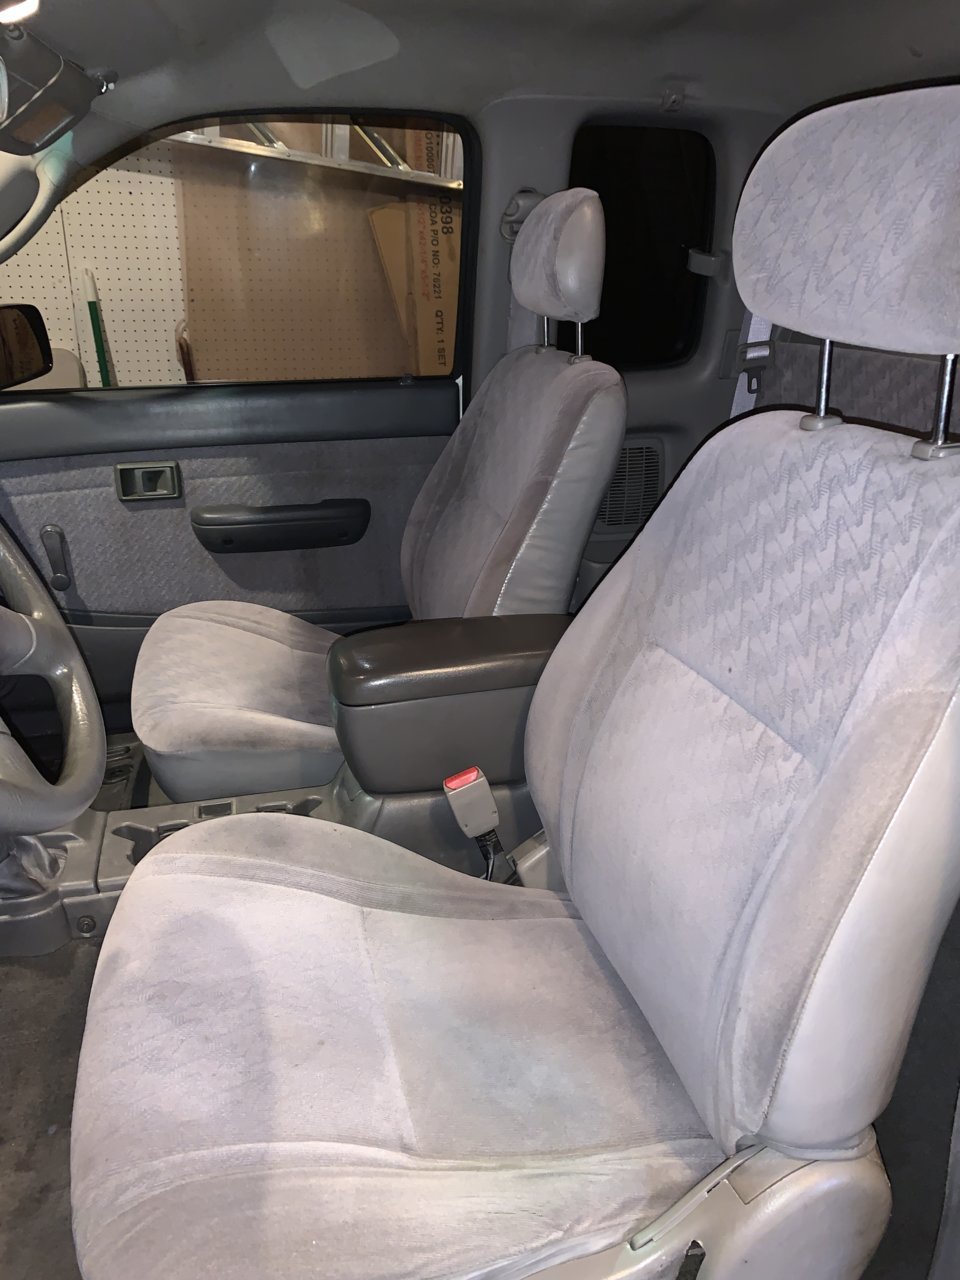 after cleaning the interior 1.jpg